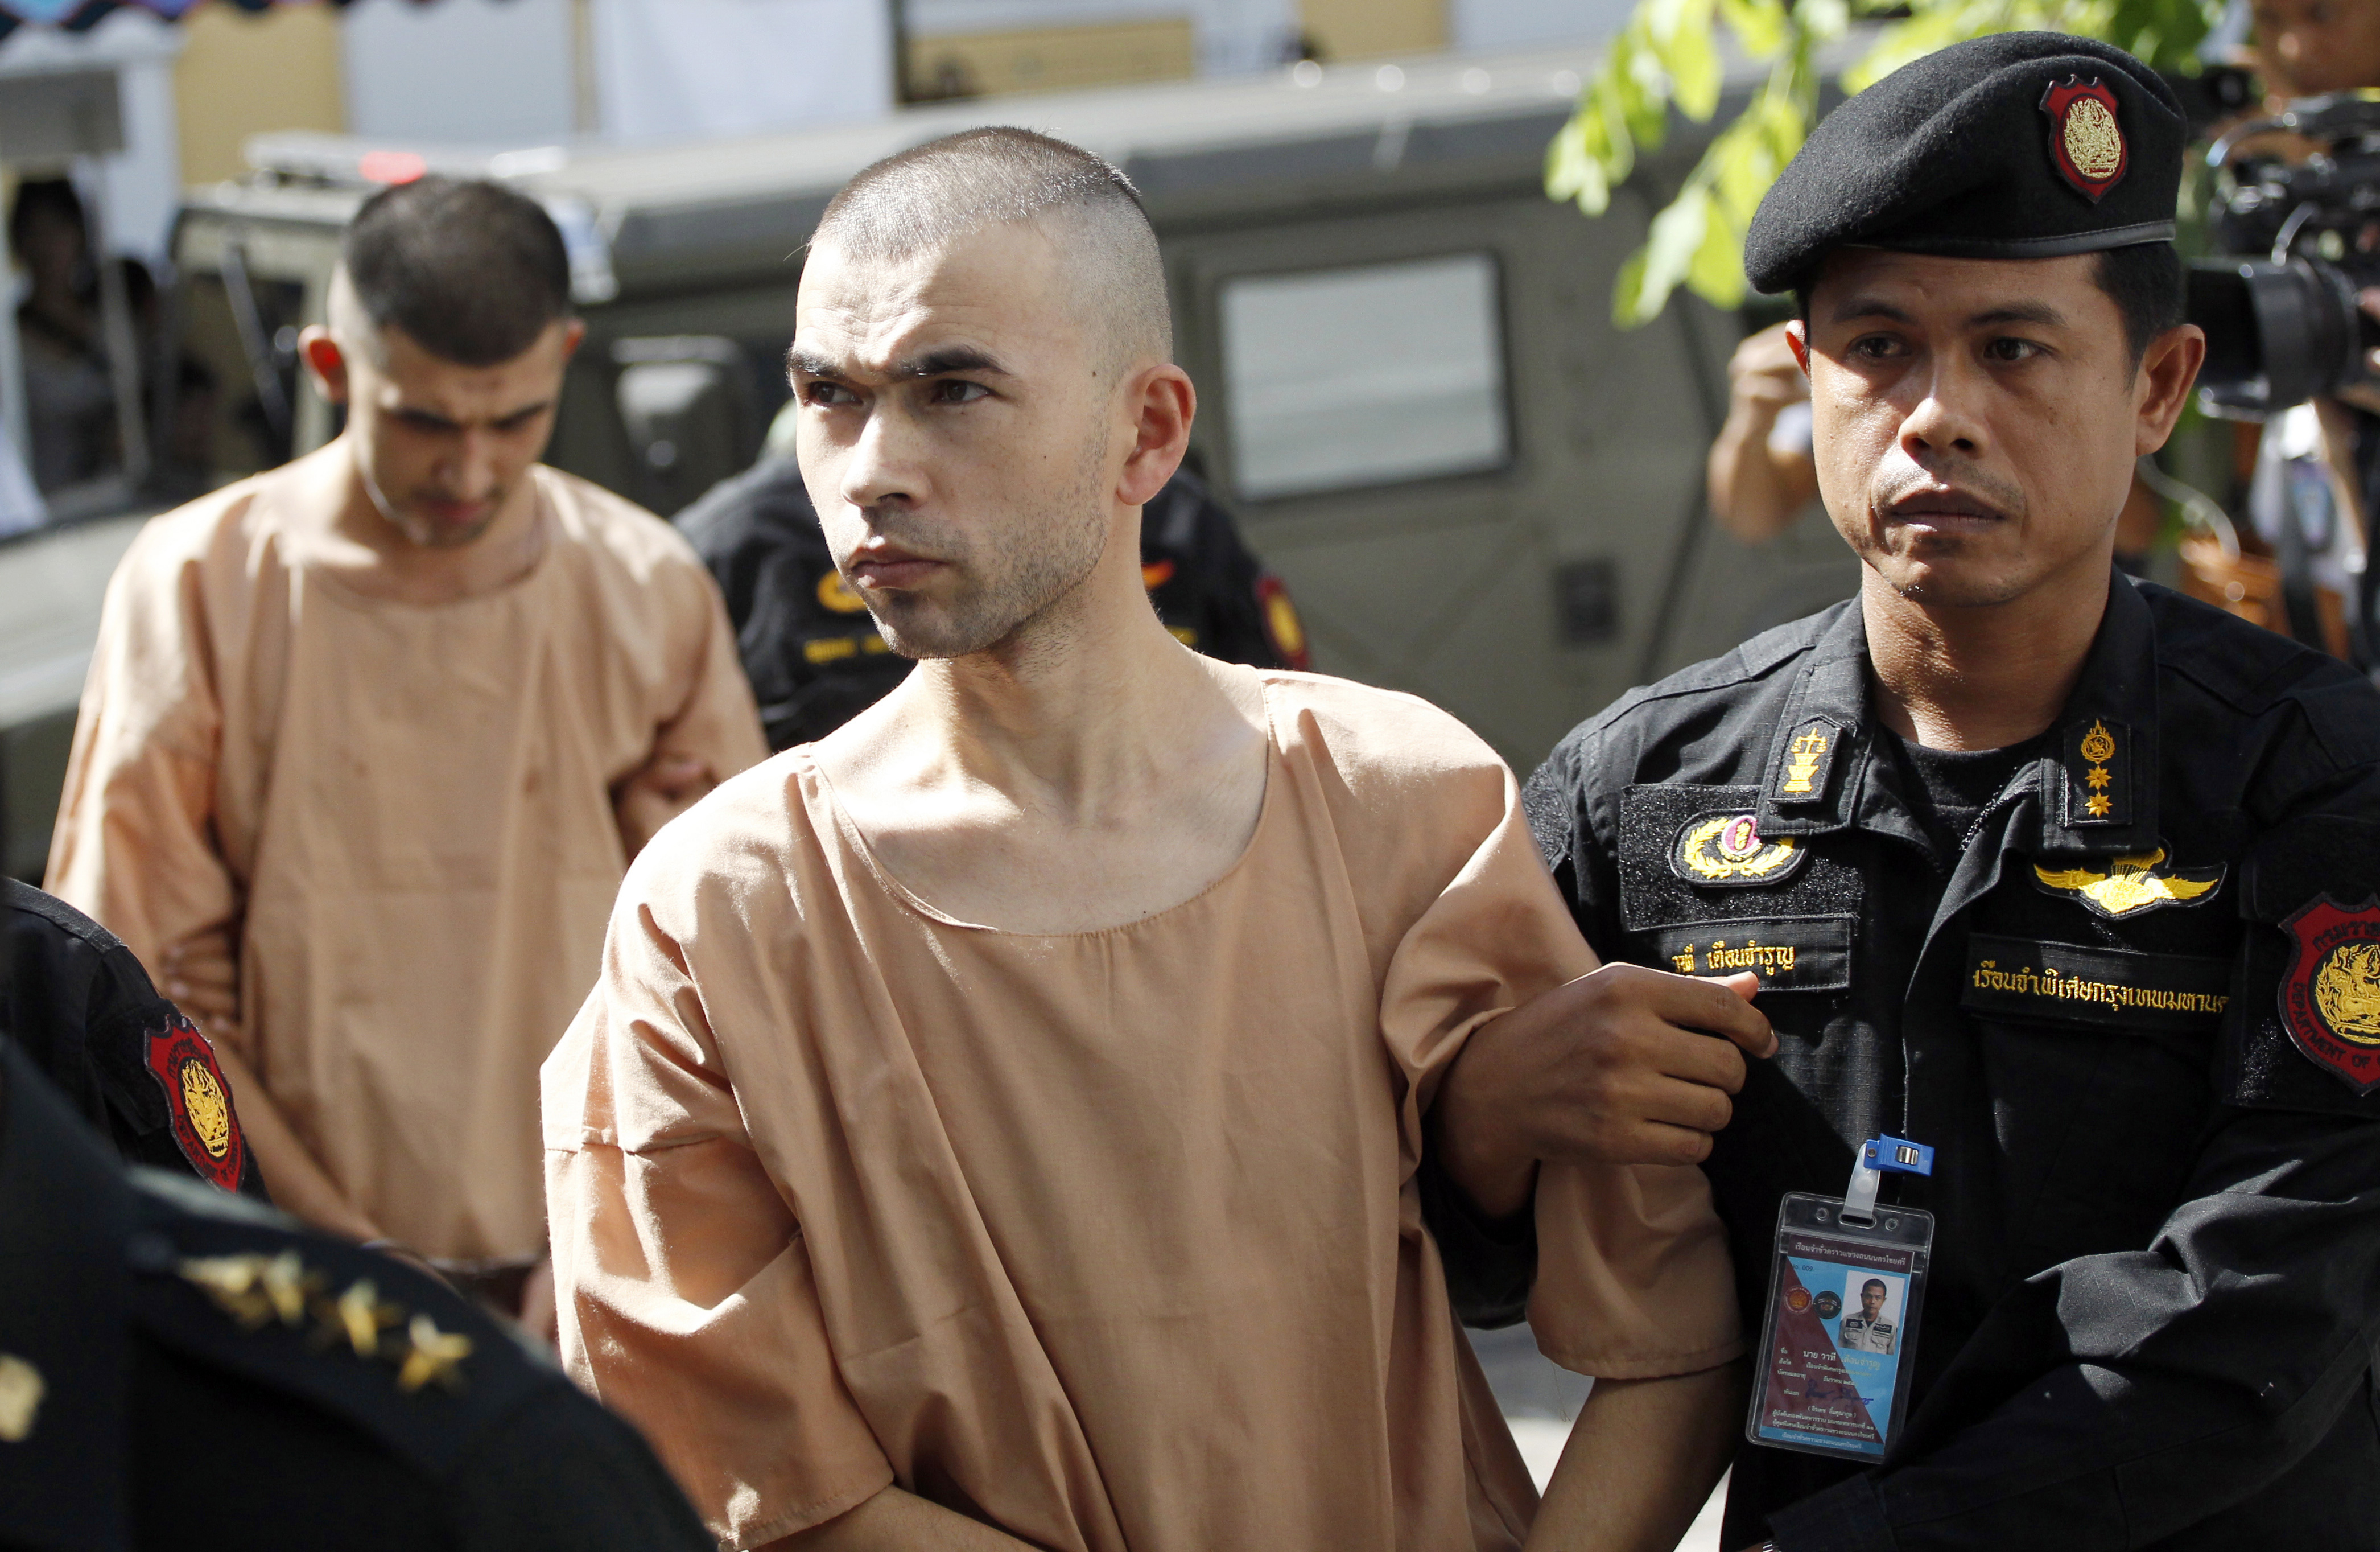 Police officers escort suspects in the Aug. 17 blast at Erawan Shrine, Bilal Mohammad, front, and Mieraili Yusufu, rear, as they arrive at a military court in Bangkok, Thailand, Tuesday, Nov. 24, 2015. The military court has indicted two men police say carried out the deadly August bombing at the shrine that left 20 people dead and more than 120 injured. (AP Photo/Sakchai Lalit)